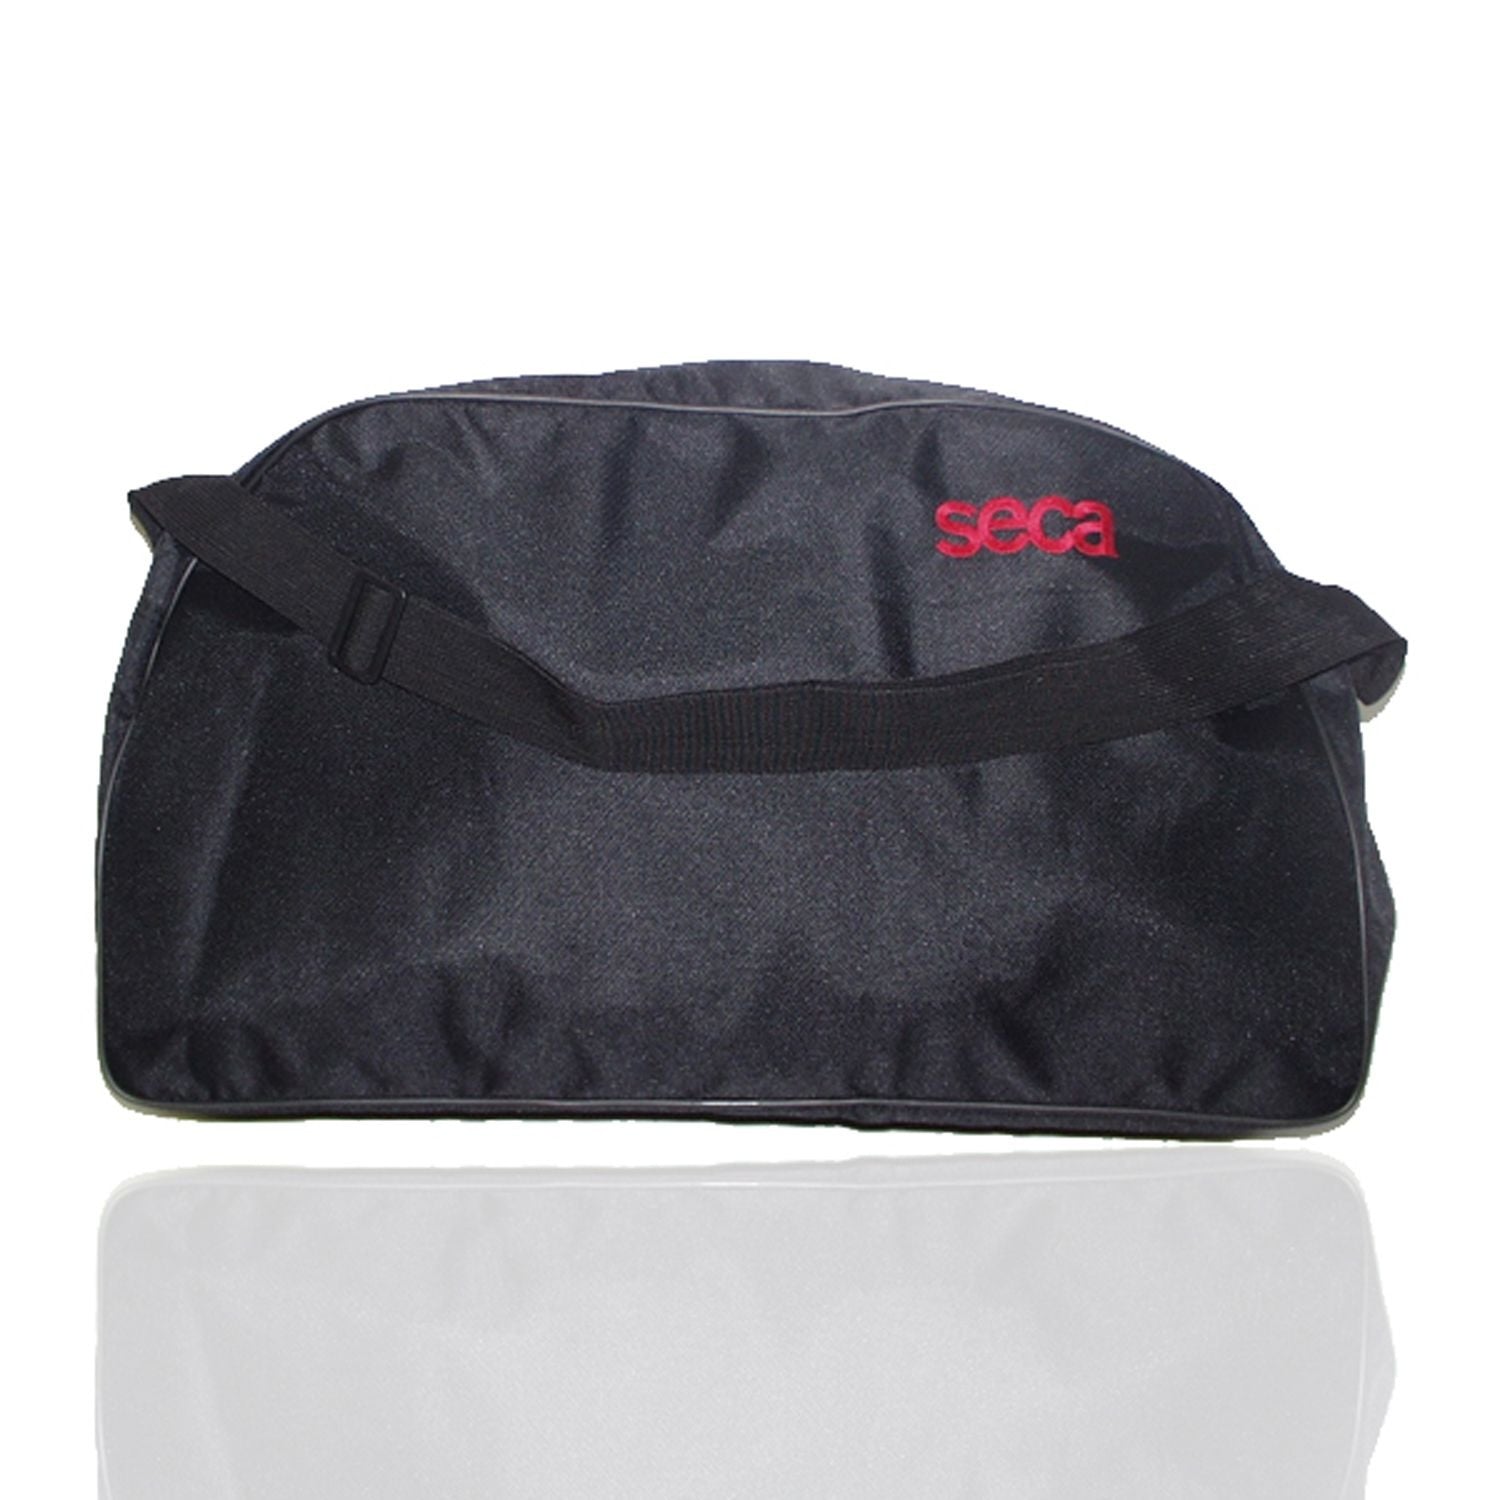 seca 413 Carry Case for seca Baby Scales